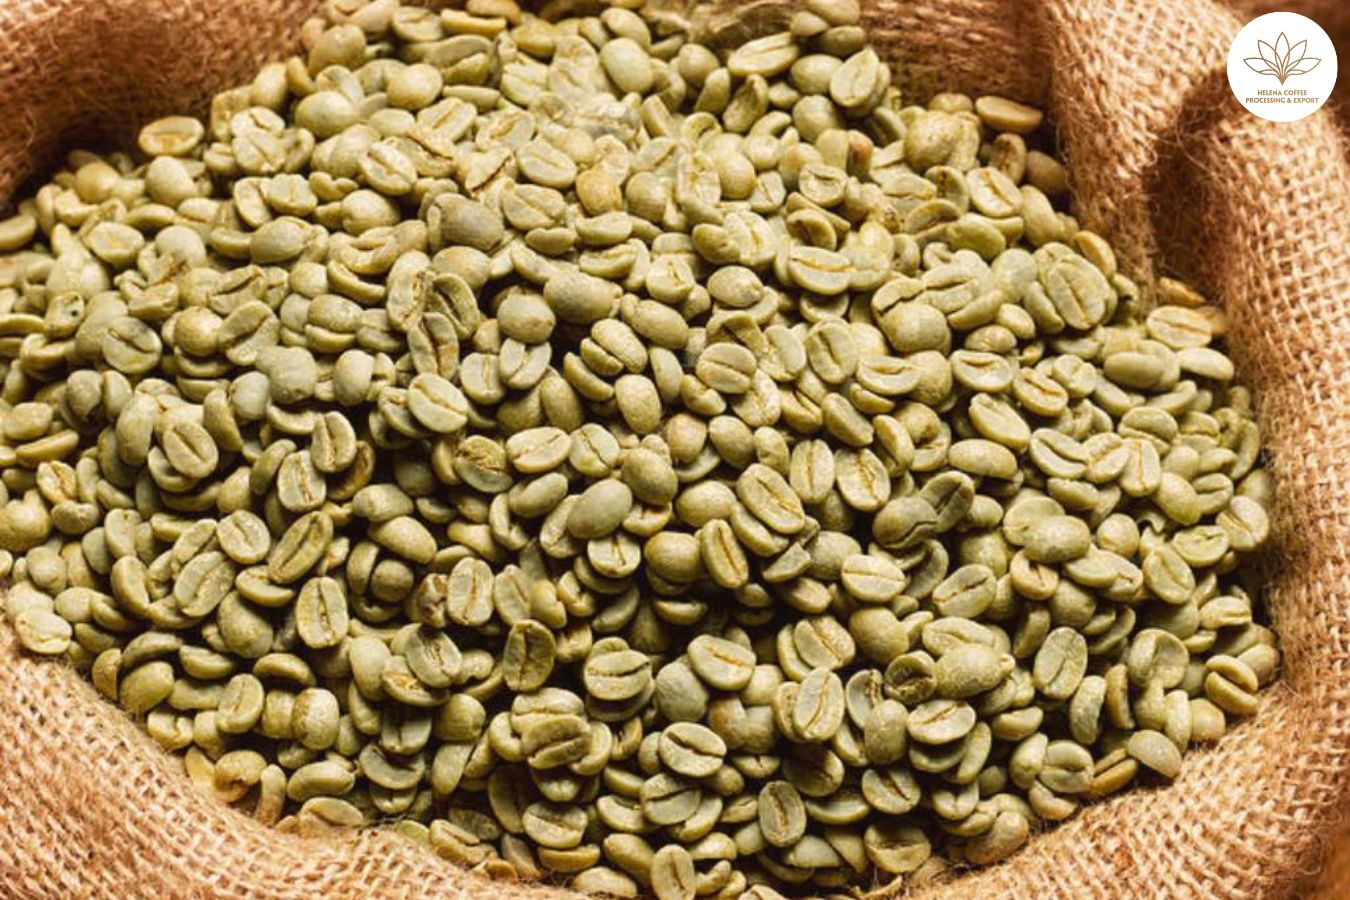 Wholesale Green Coffee Beans Canada Top Choice